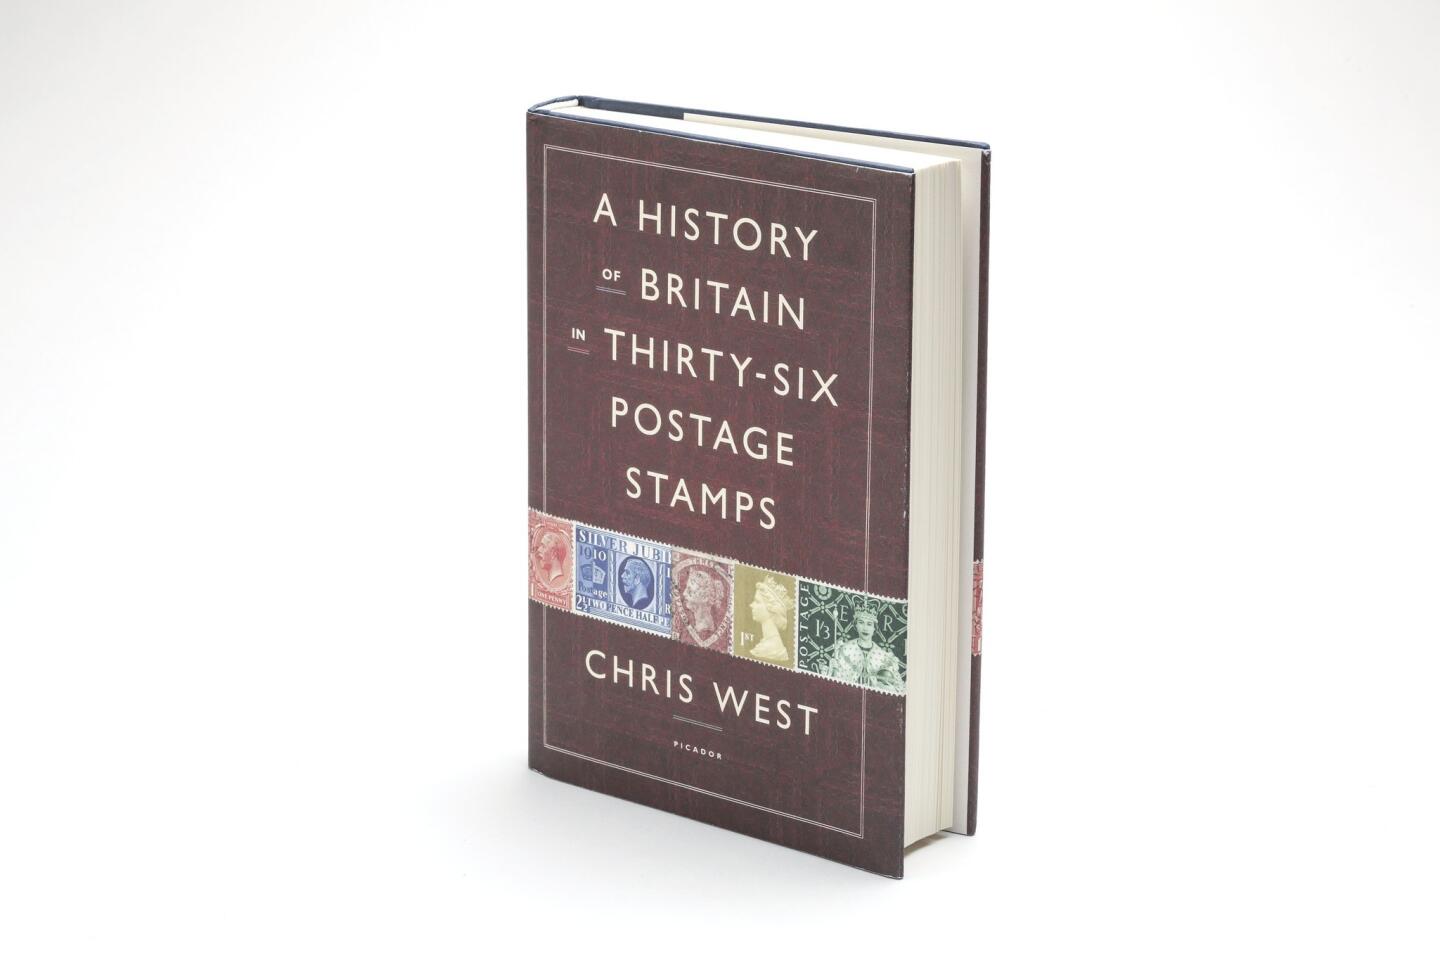 "A History of Britain in Thirty-Six Postage Stamps"